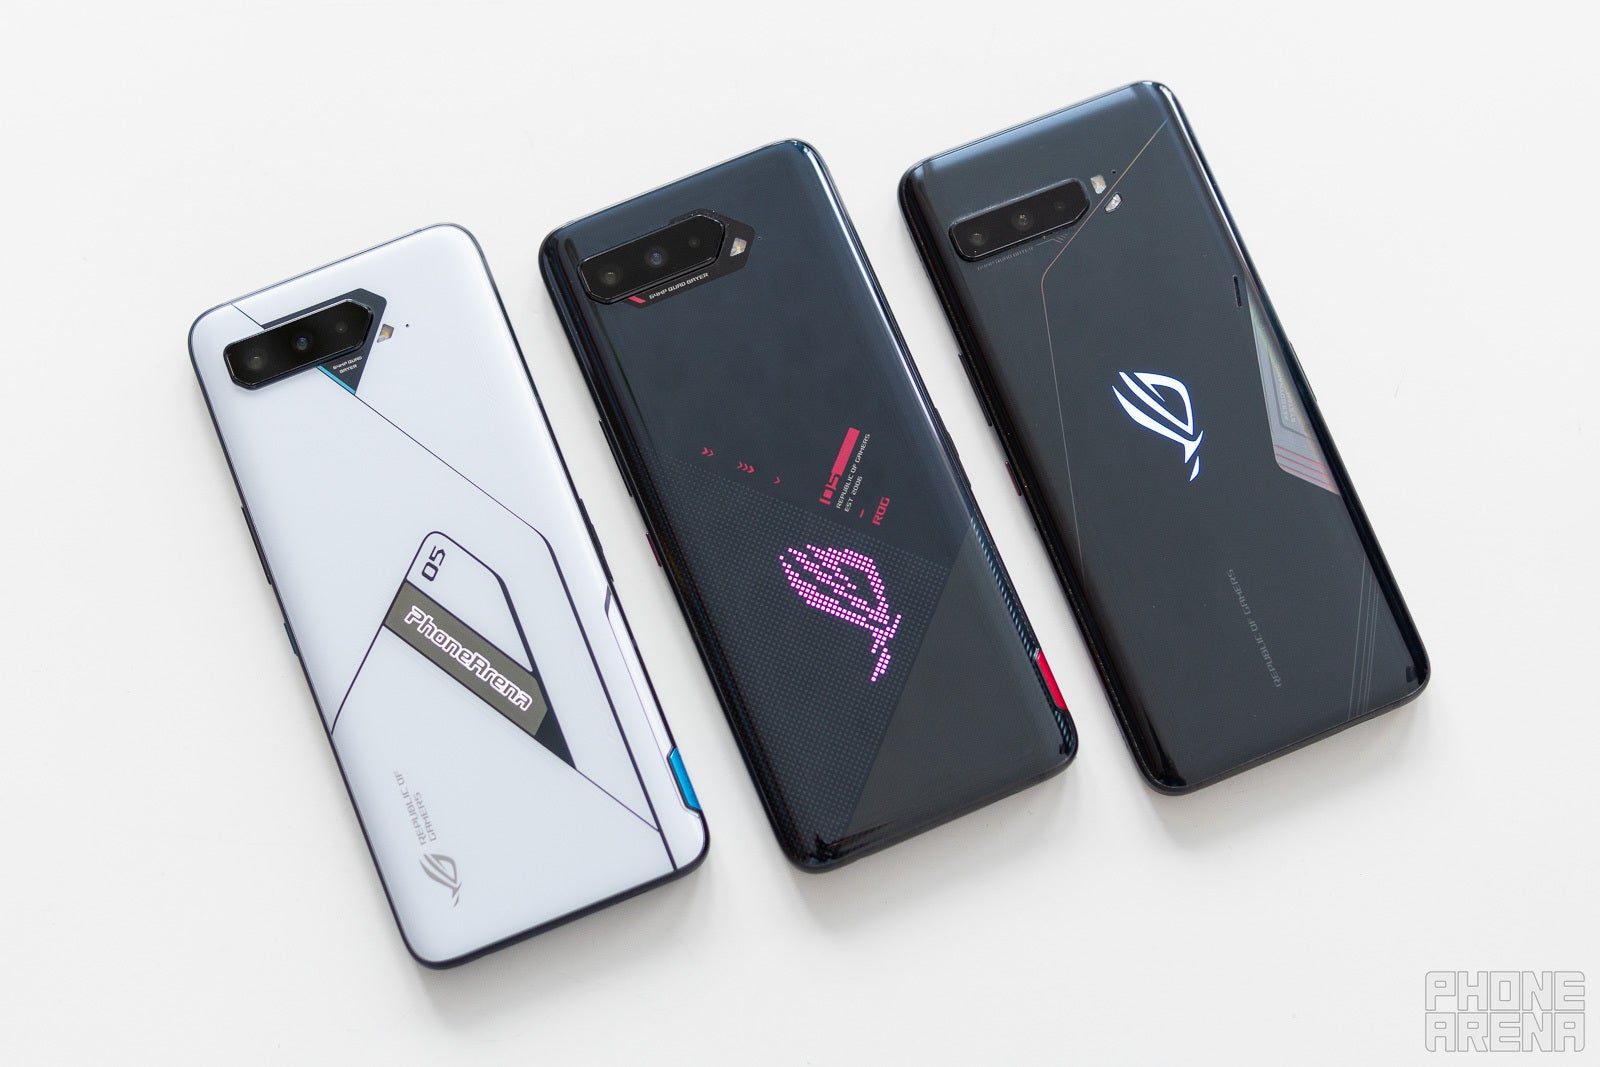 The Asus ROG Phone 5 Ultimate (left), the ROG Phone 5 (center) and their predecessor, the ROG Phone 3 (right) - Asus ROG Phone 5 Ultimate review